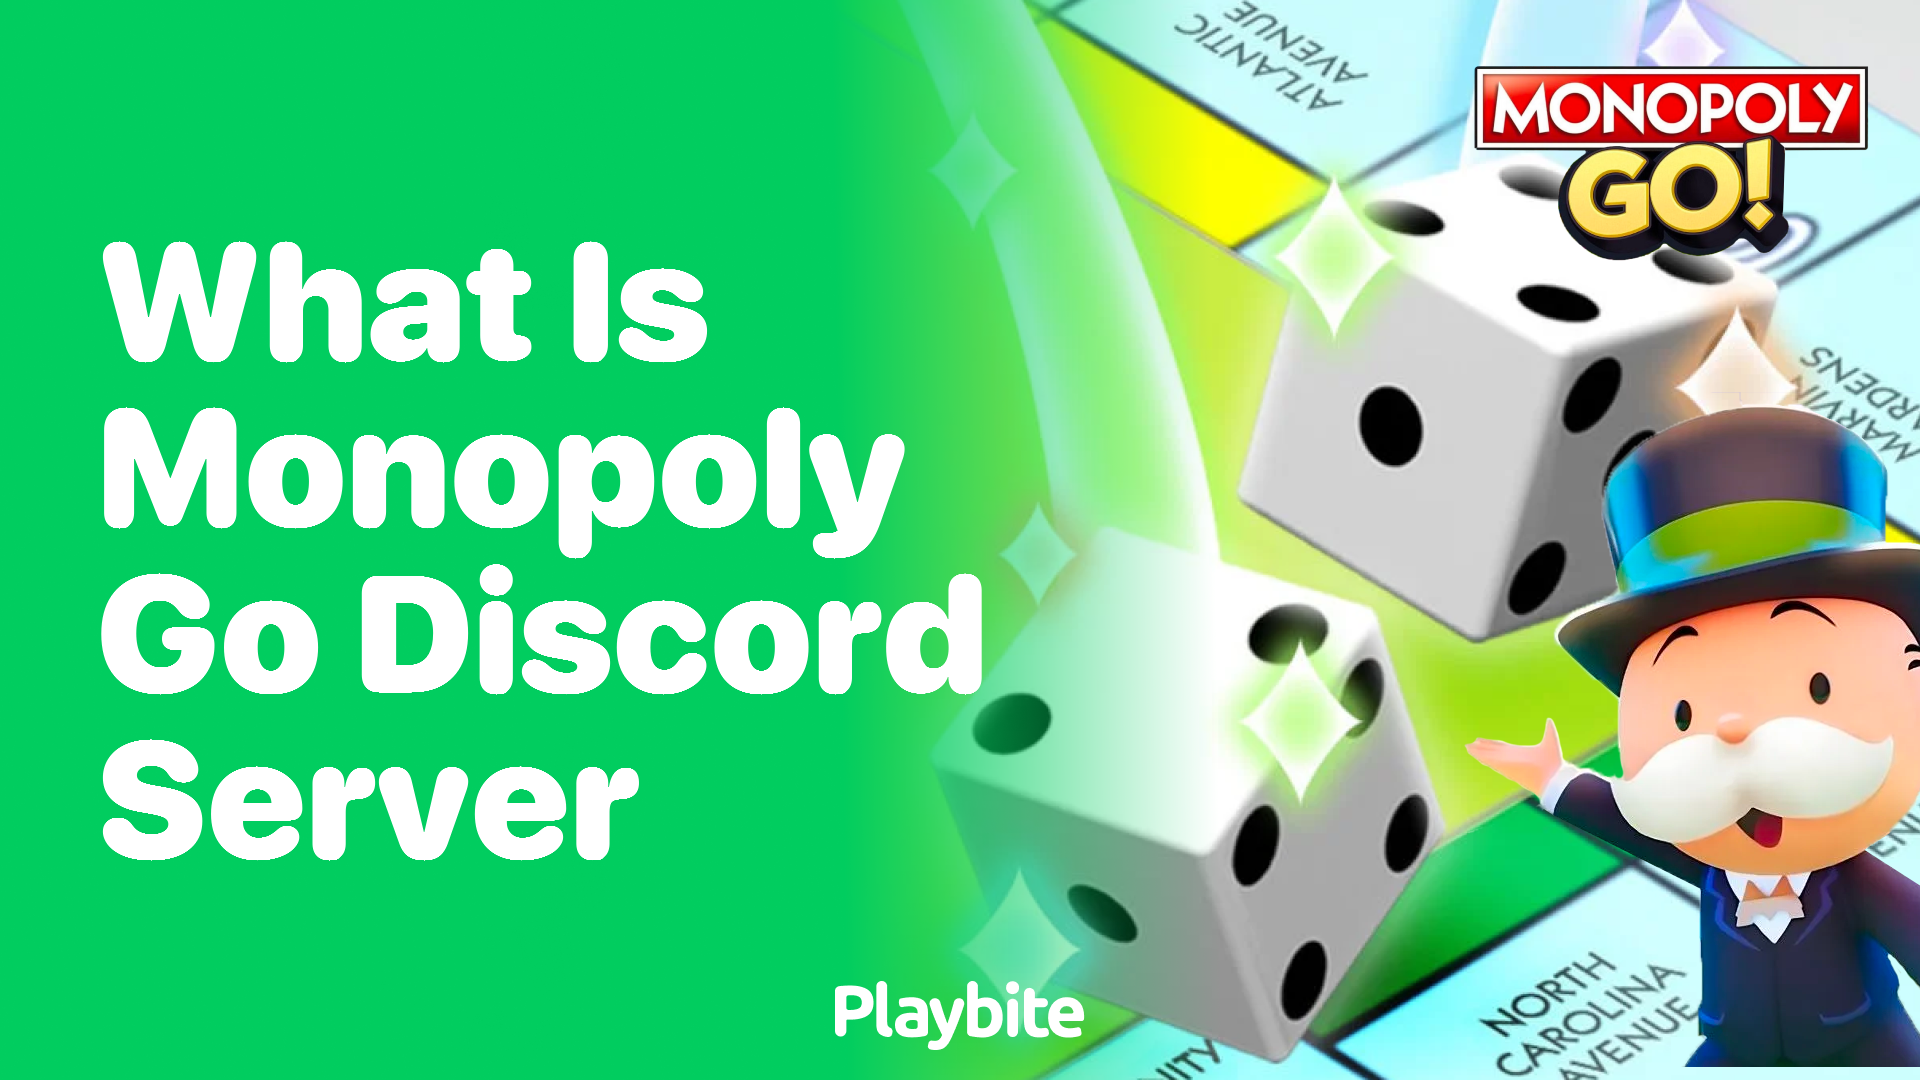 What Is the Monopoly Go Discord Server?